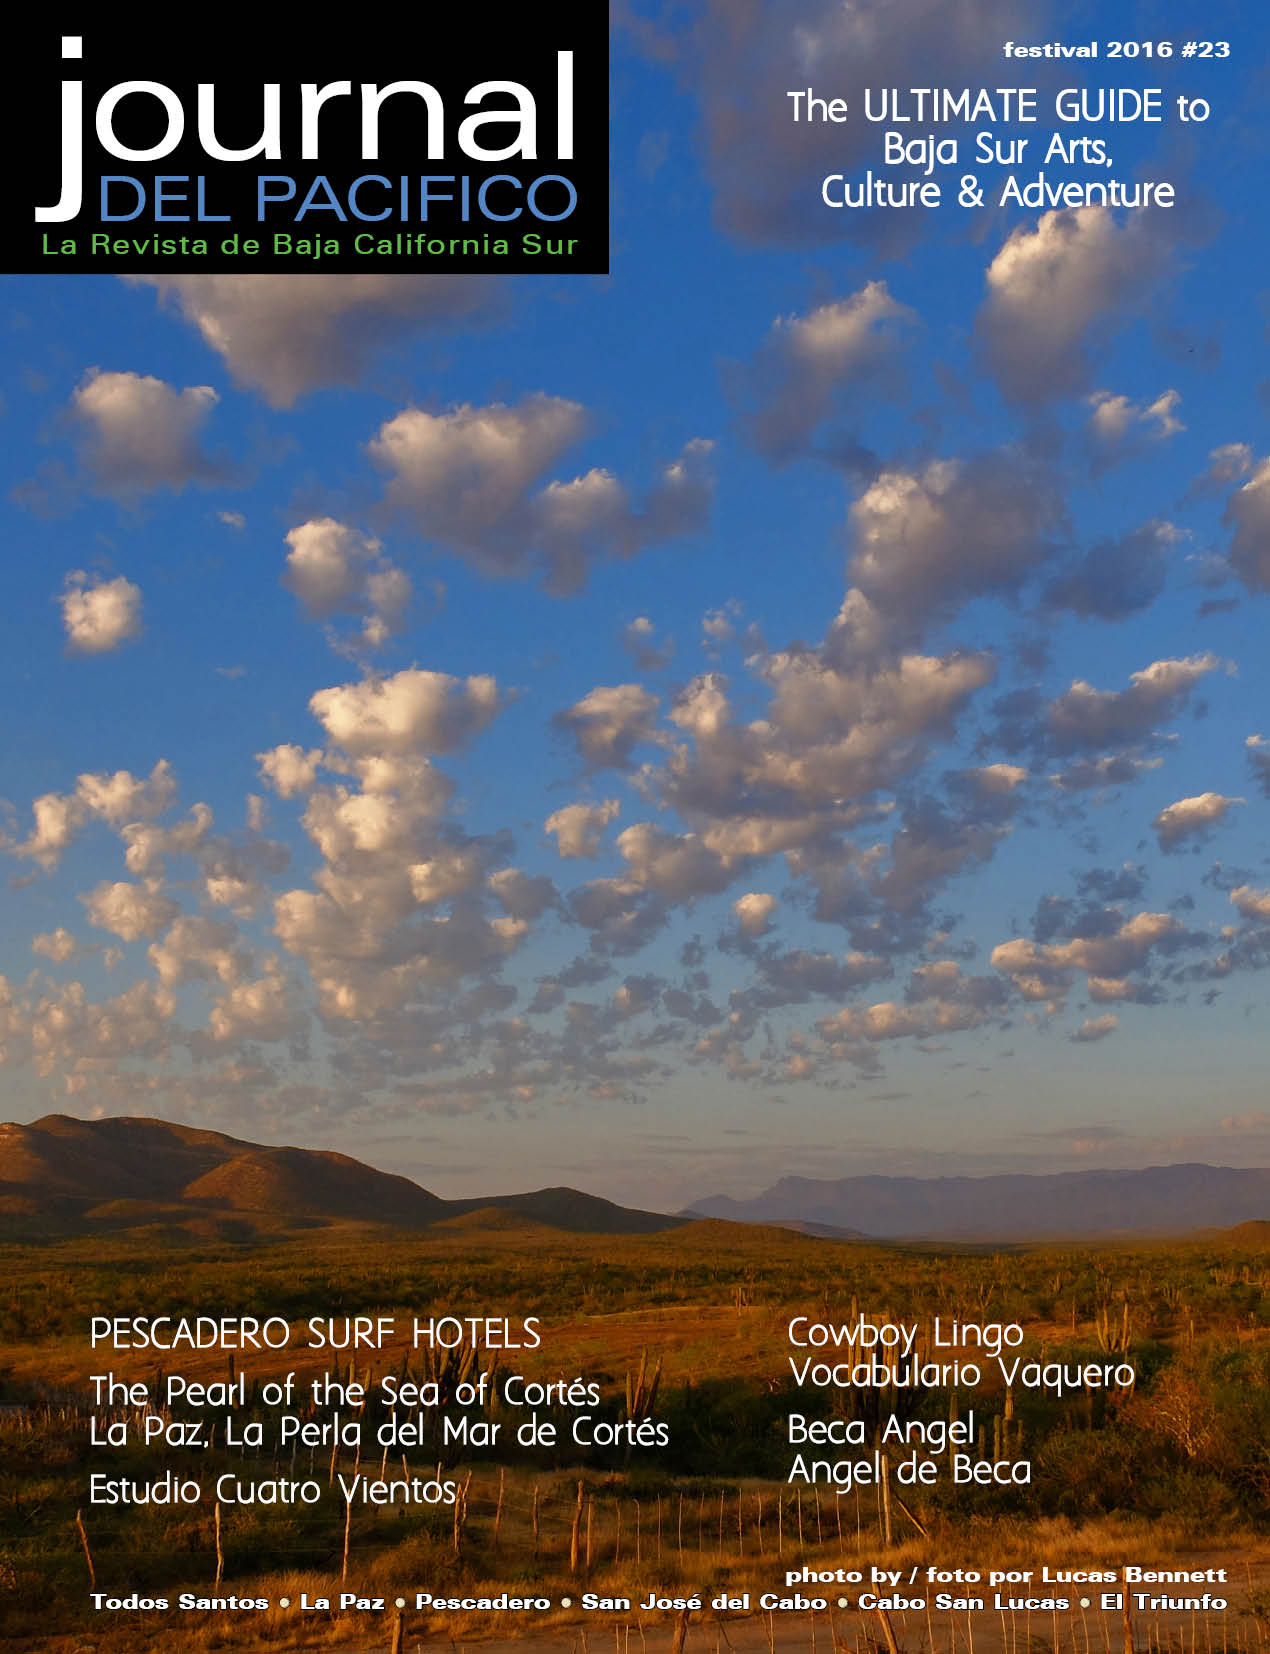 Festival 2016 Issue of Journal del Pacifico